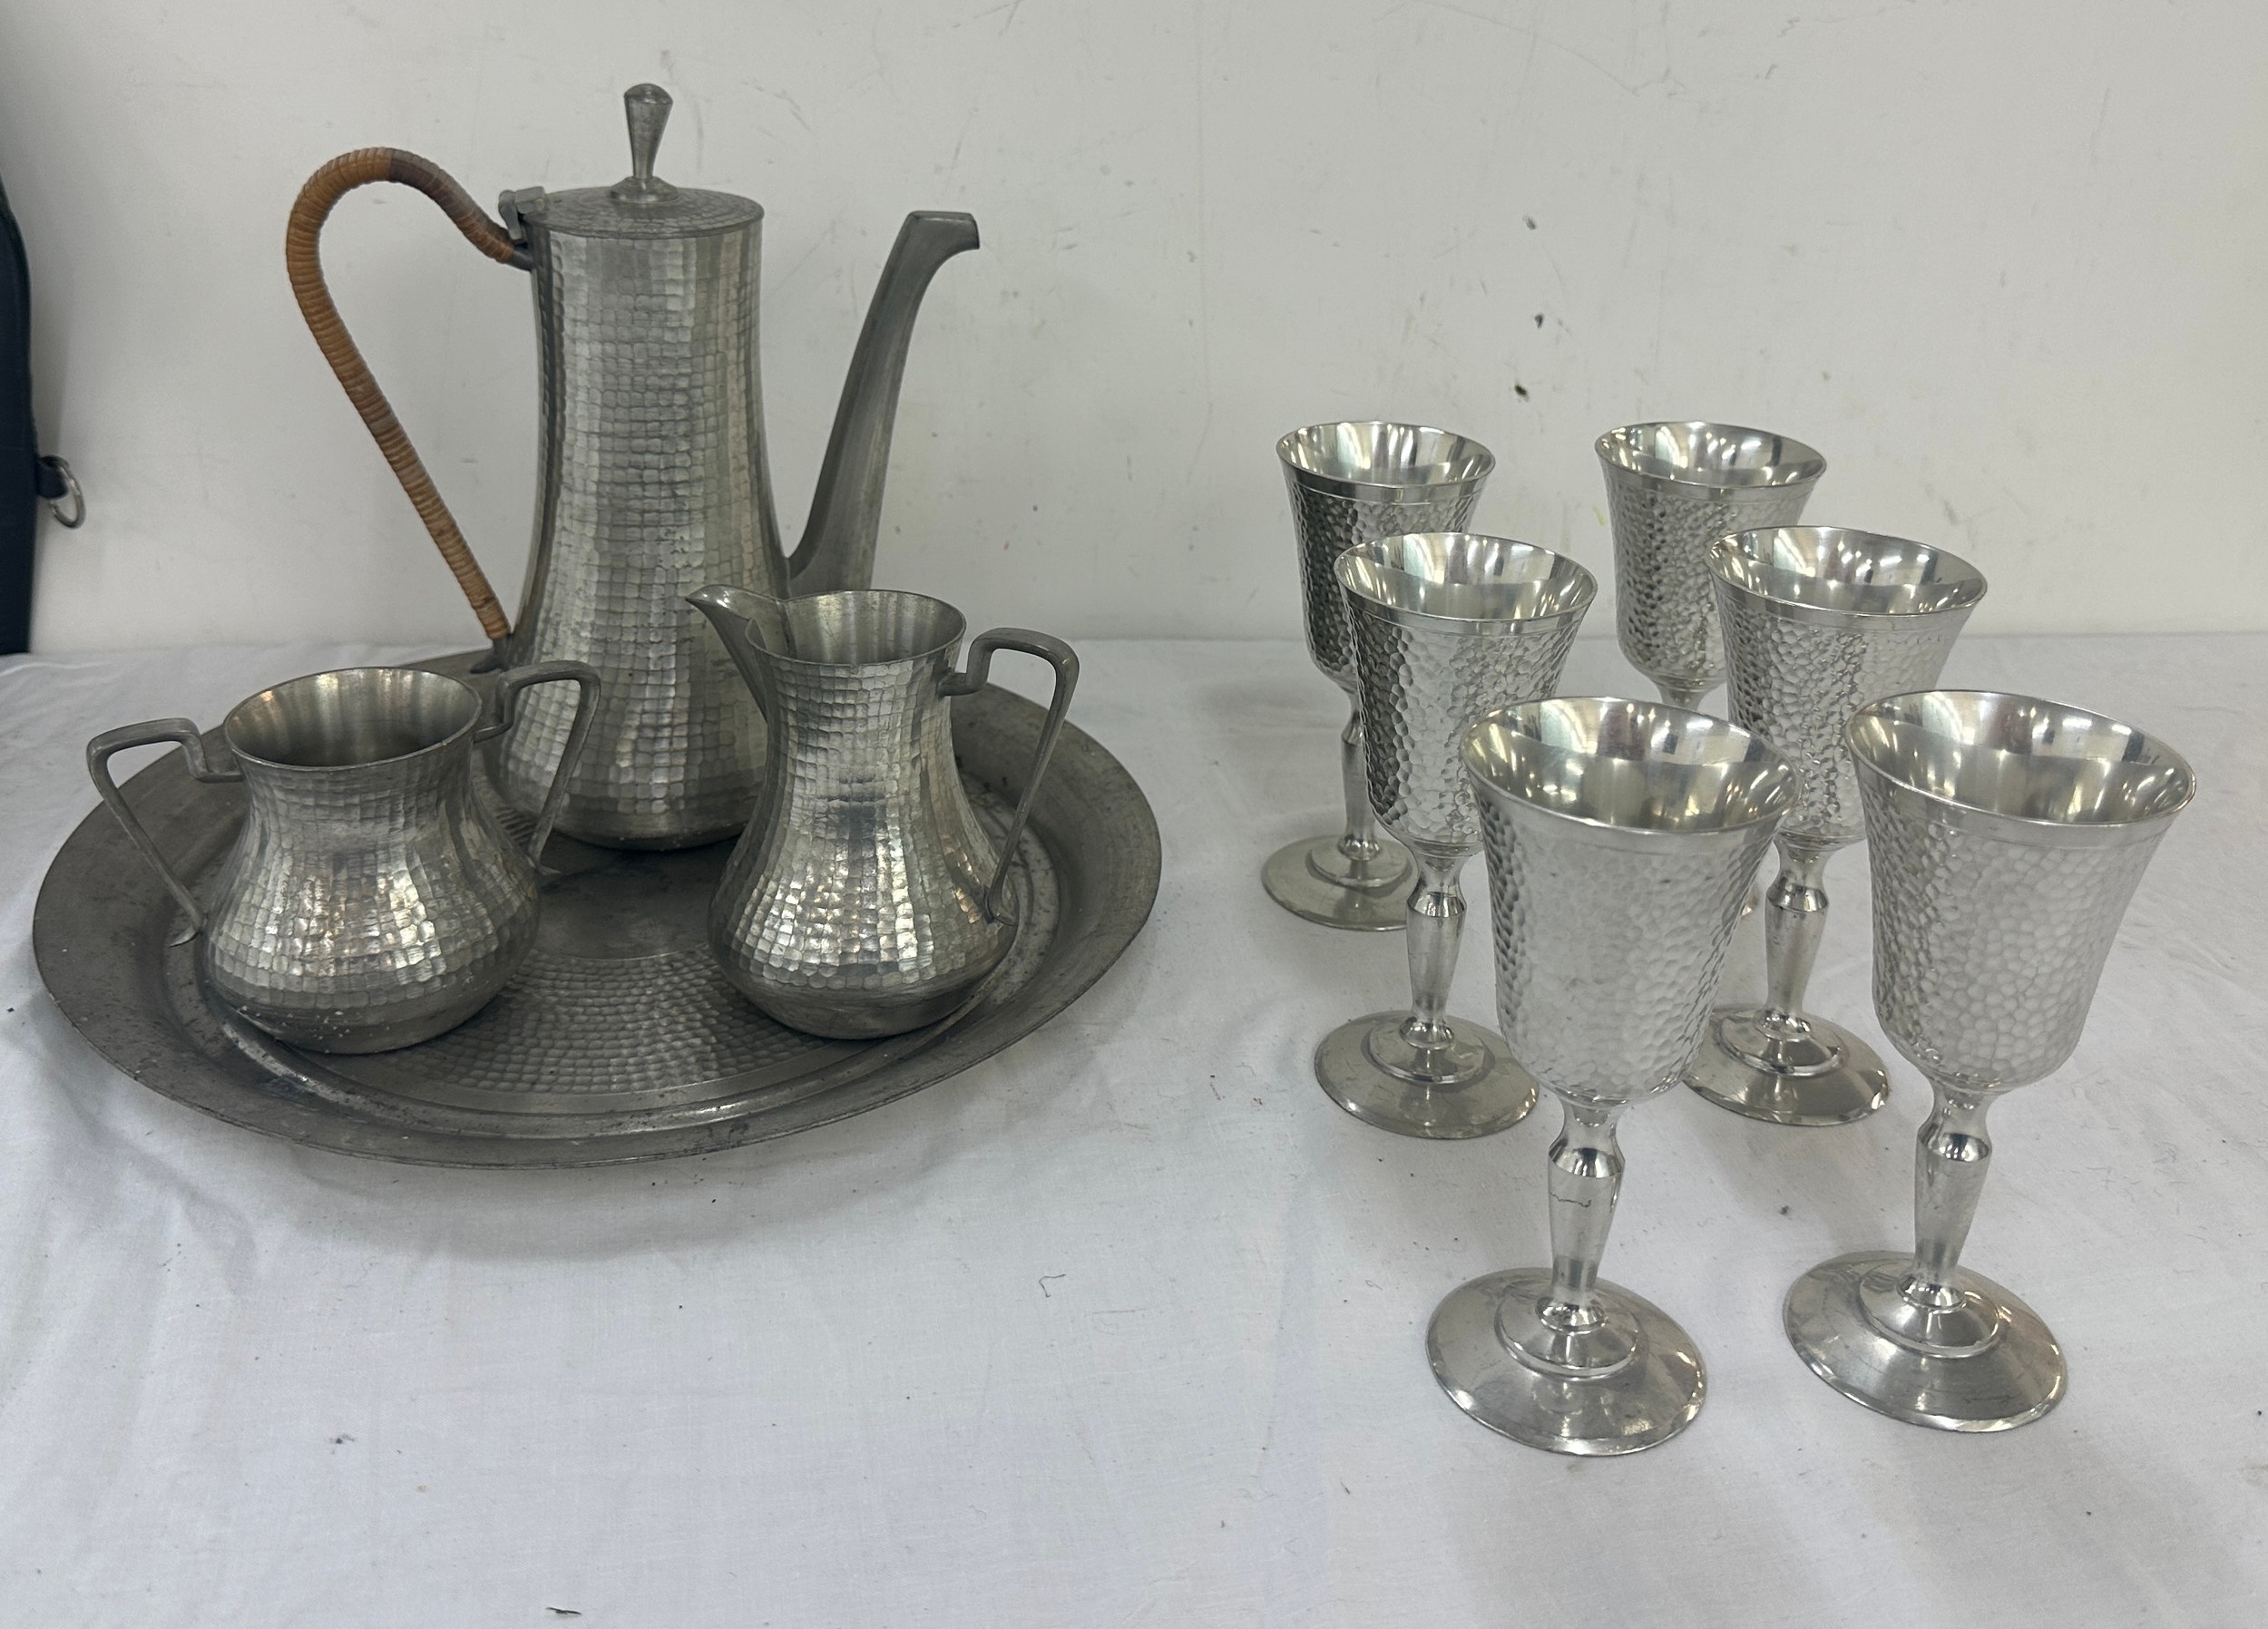 Selangor pewter coffee set, comprising tray, coffee pot, creamer and sugar pot, together with 6